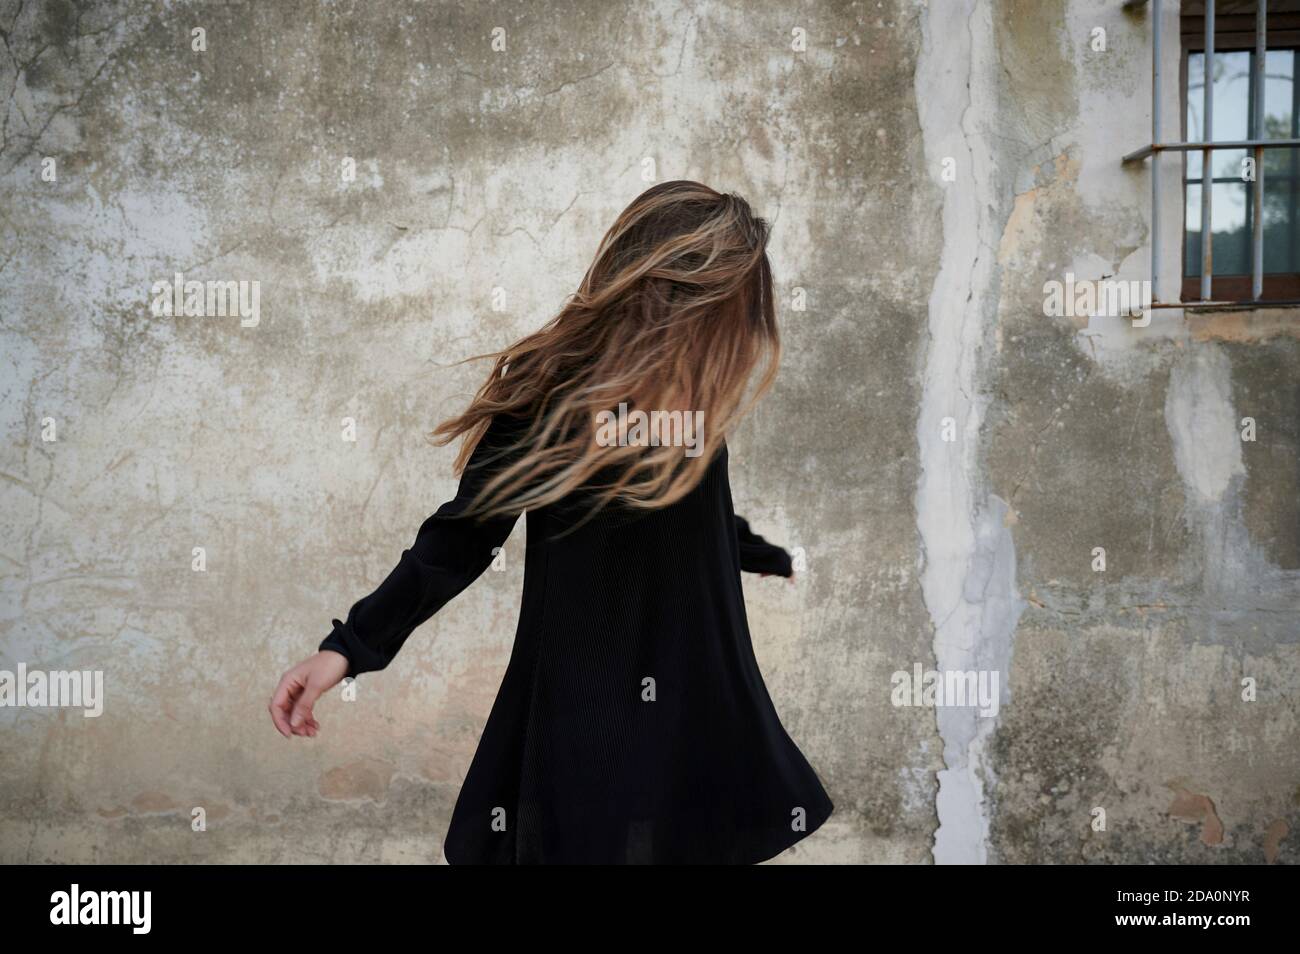 Unrecognizable female in black dress and long hair covering face standing against grungy concrete wall of aged building Stock Photo